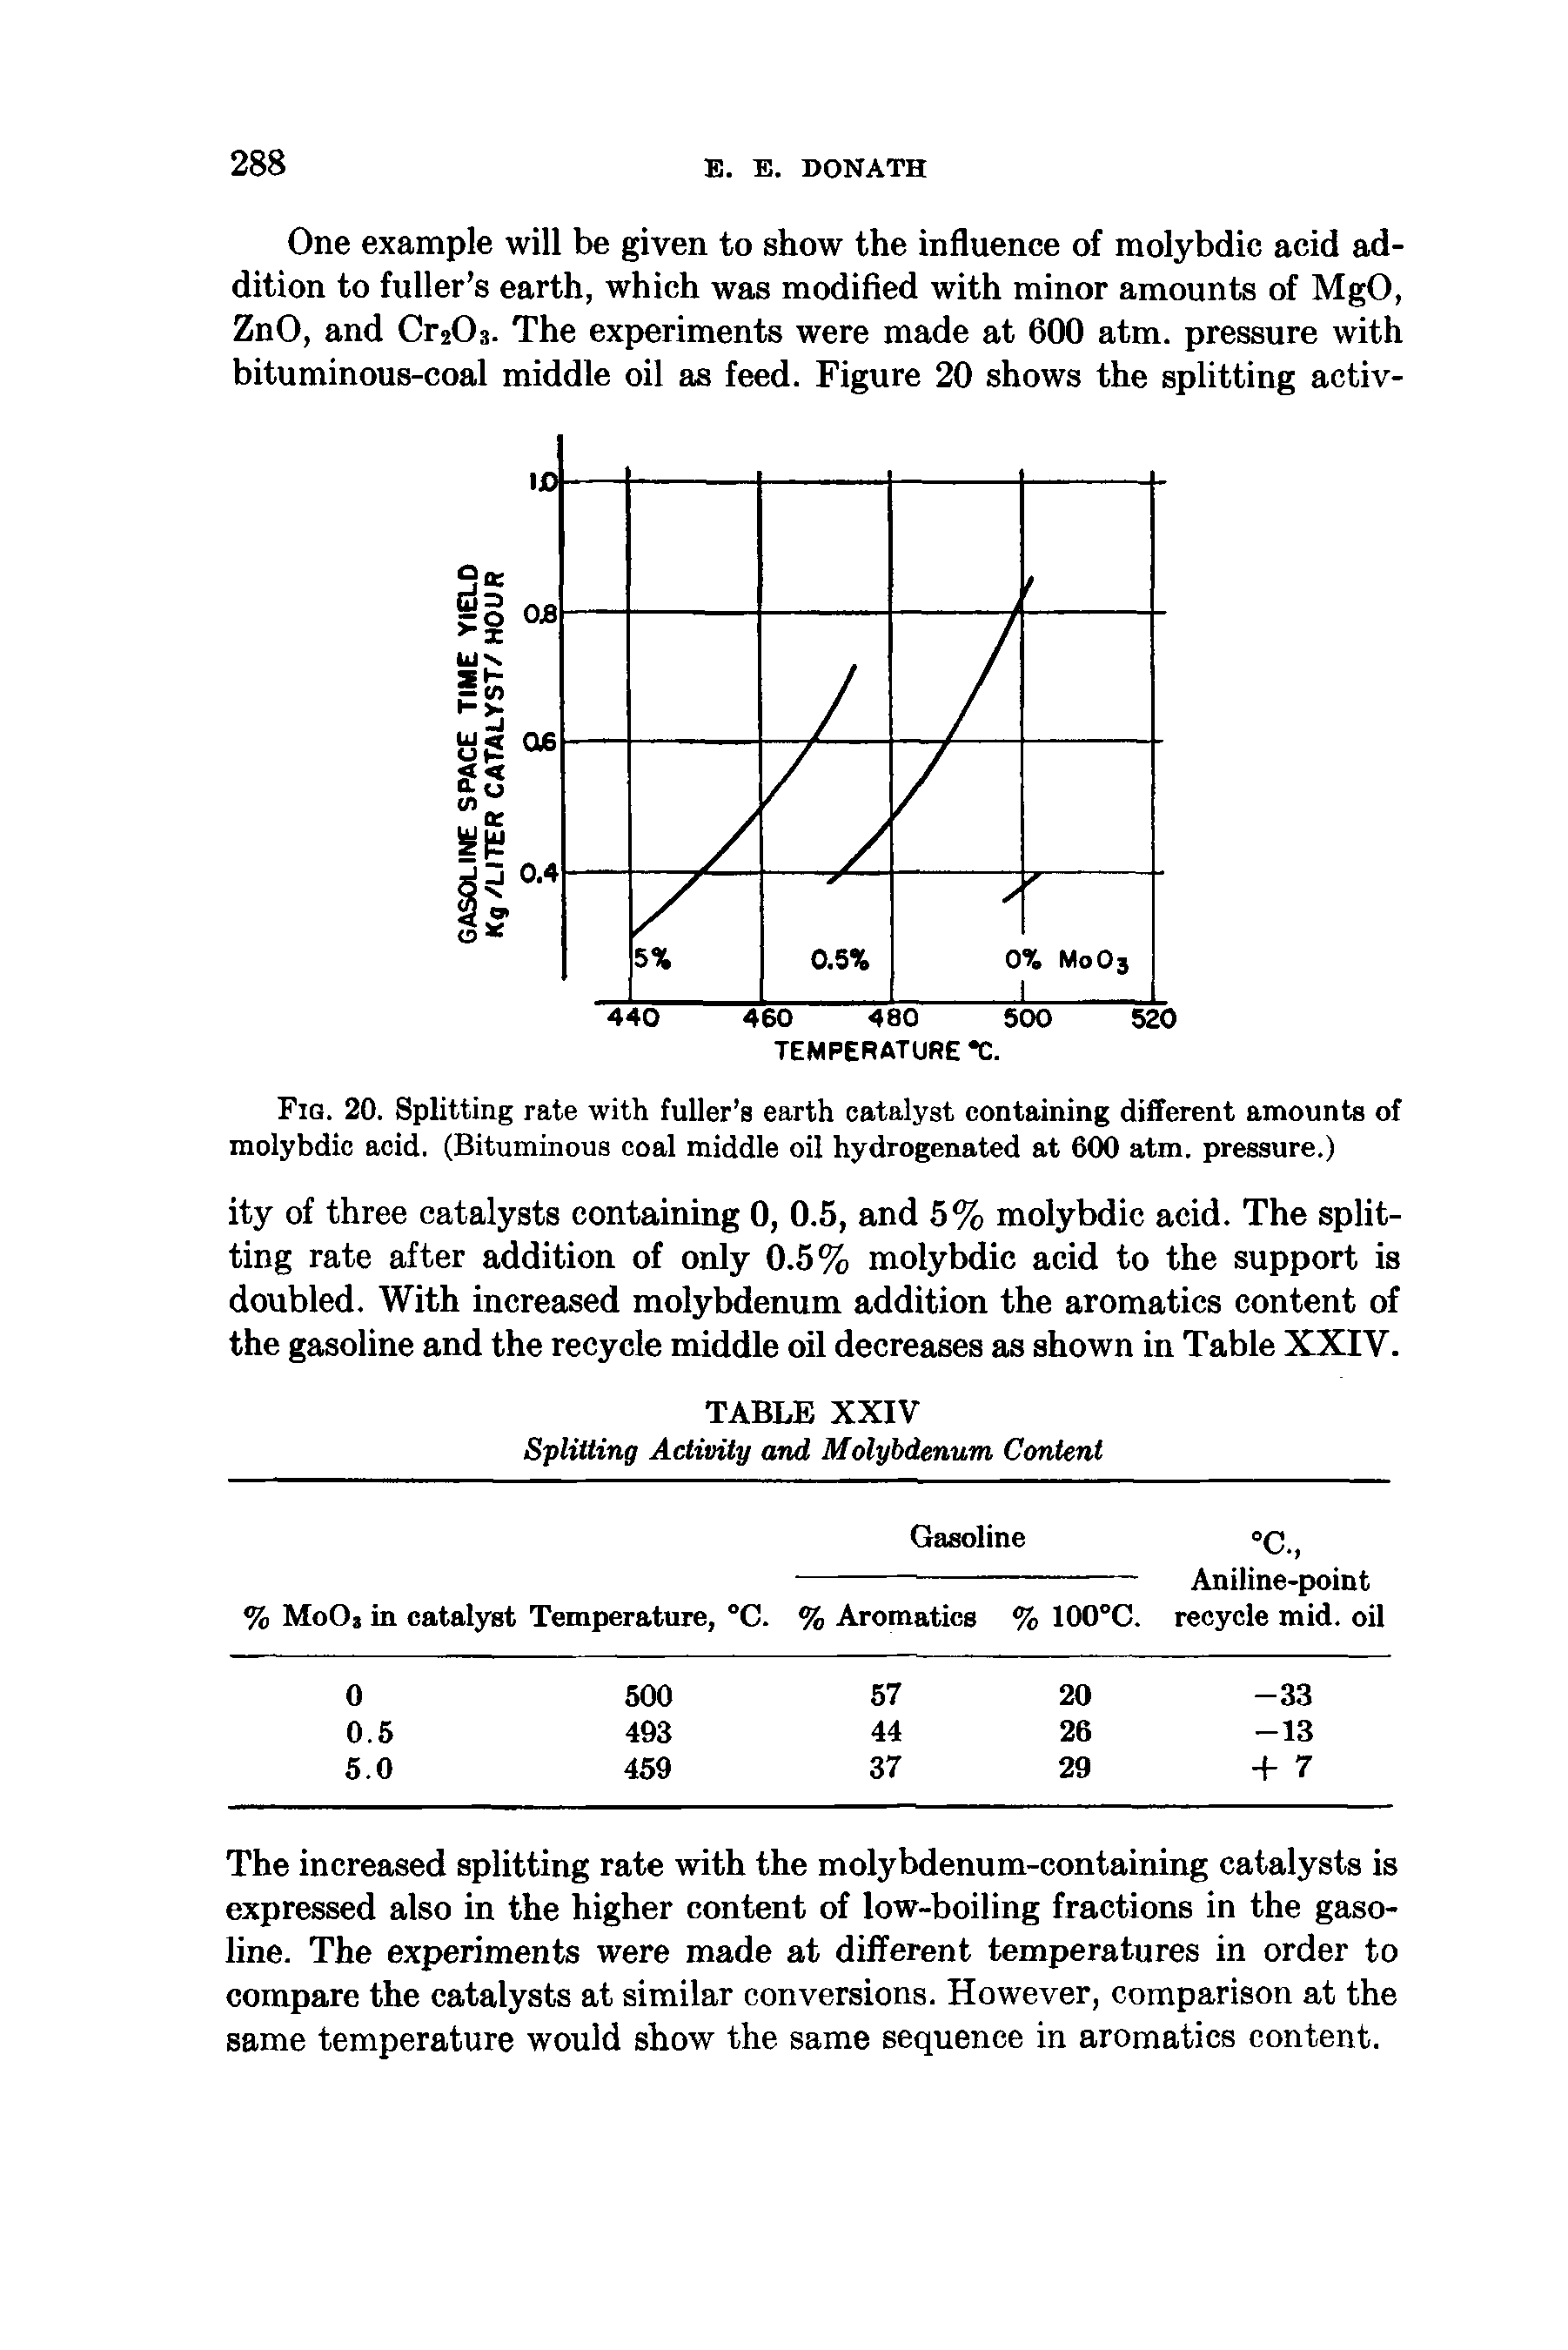 Fig. 20. Splitting rate with fuller s earth catalyst containing different amounts of molybdic acid. (Bituminous coal middle oil hydrogenated at 600 atm. pressure.)...